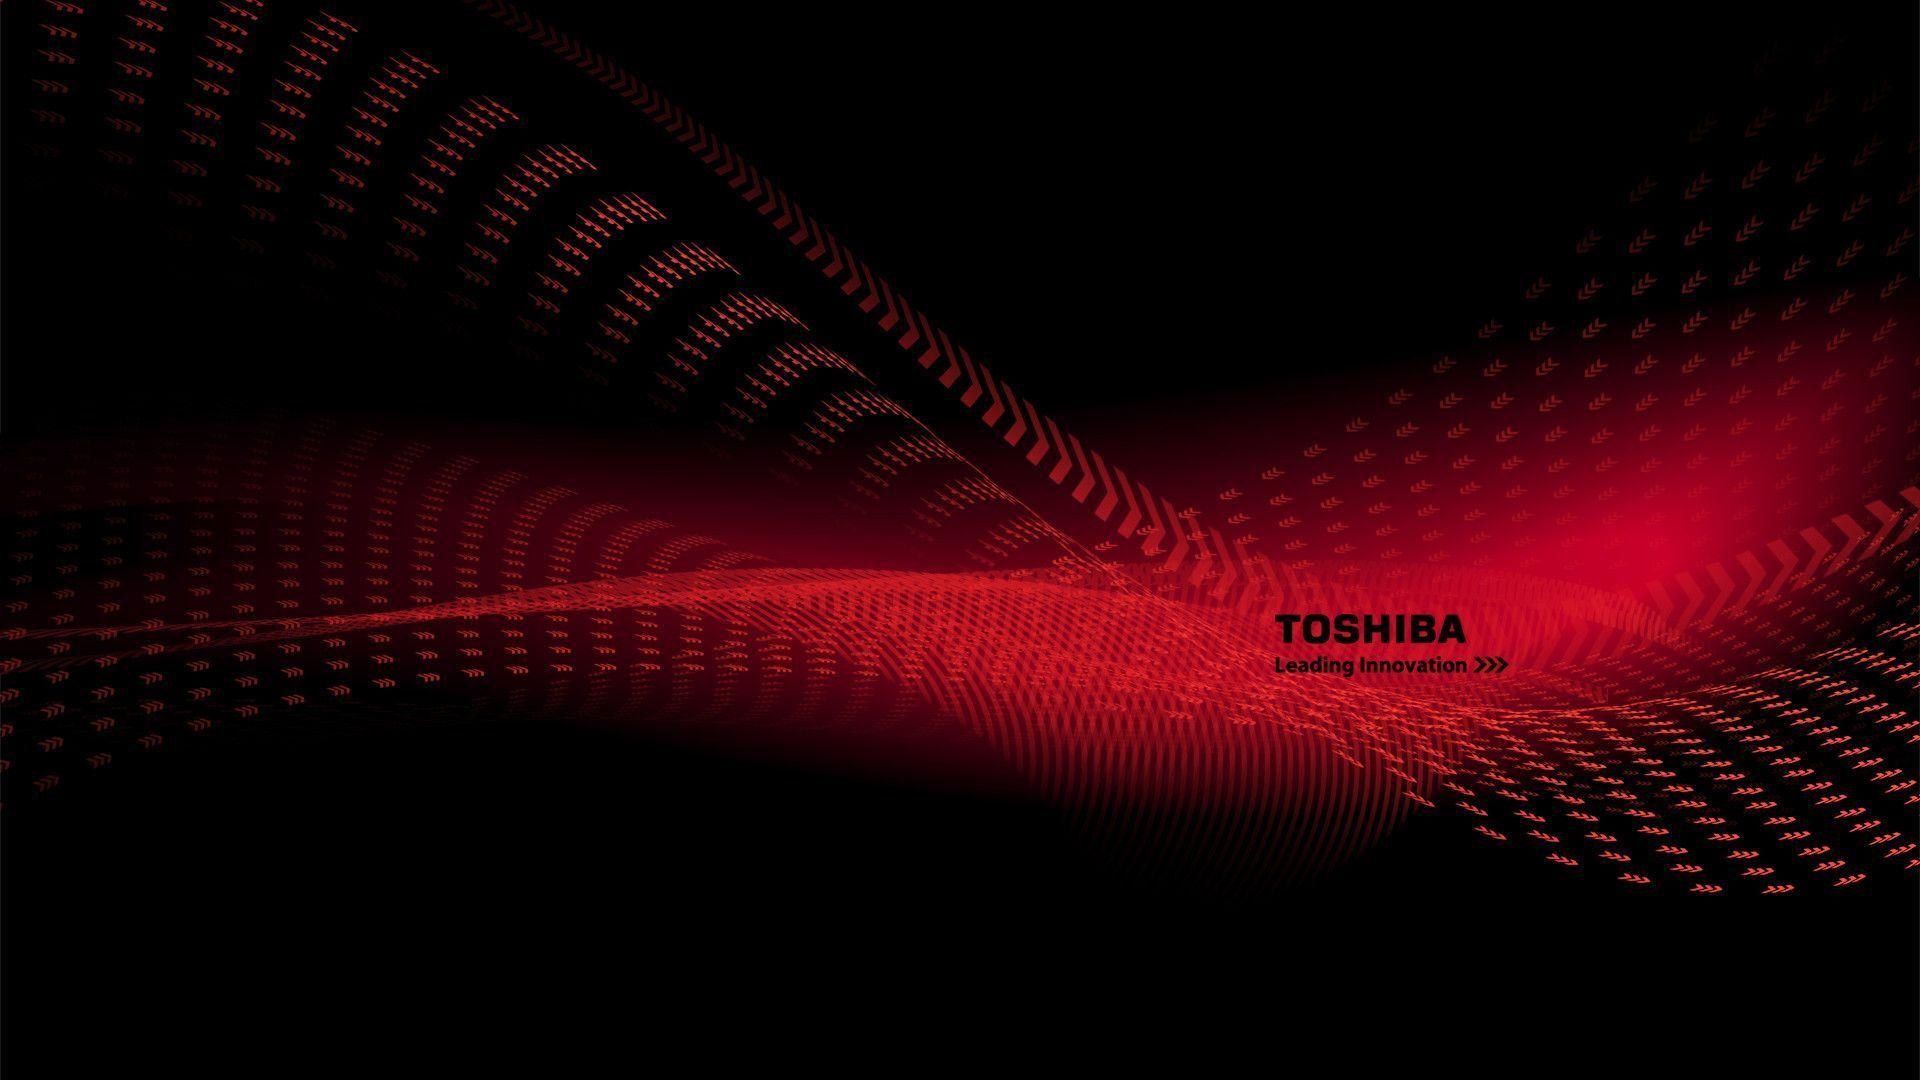 Toshiba Wallpaper Free 27916 HD Picture. Top Background Free